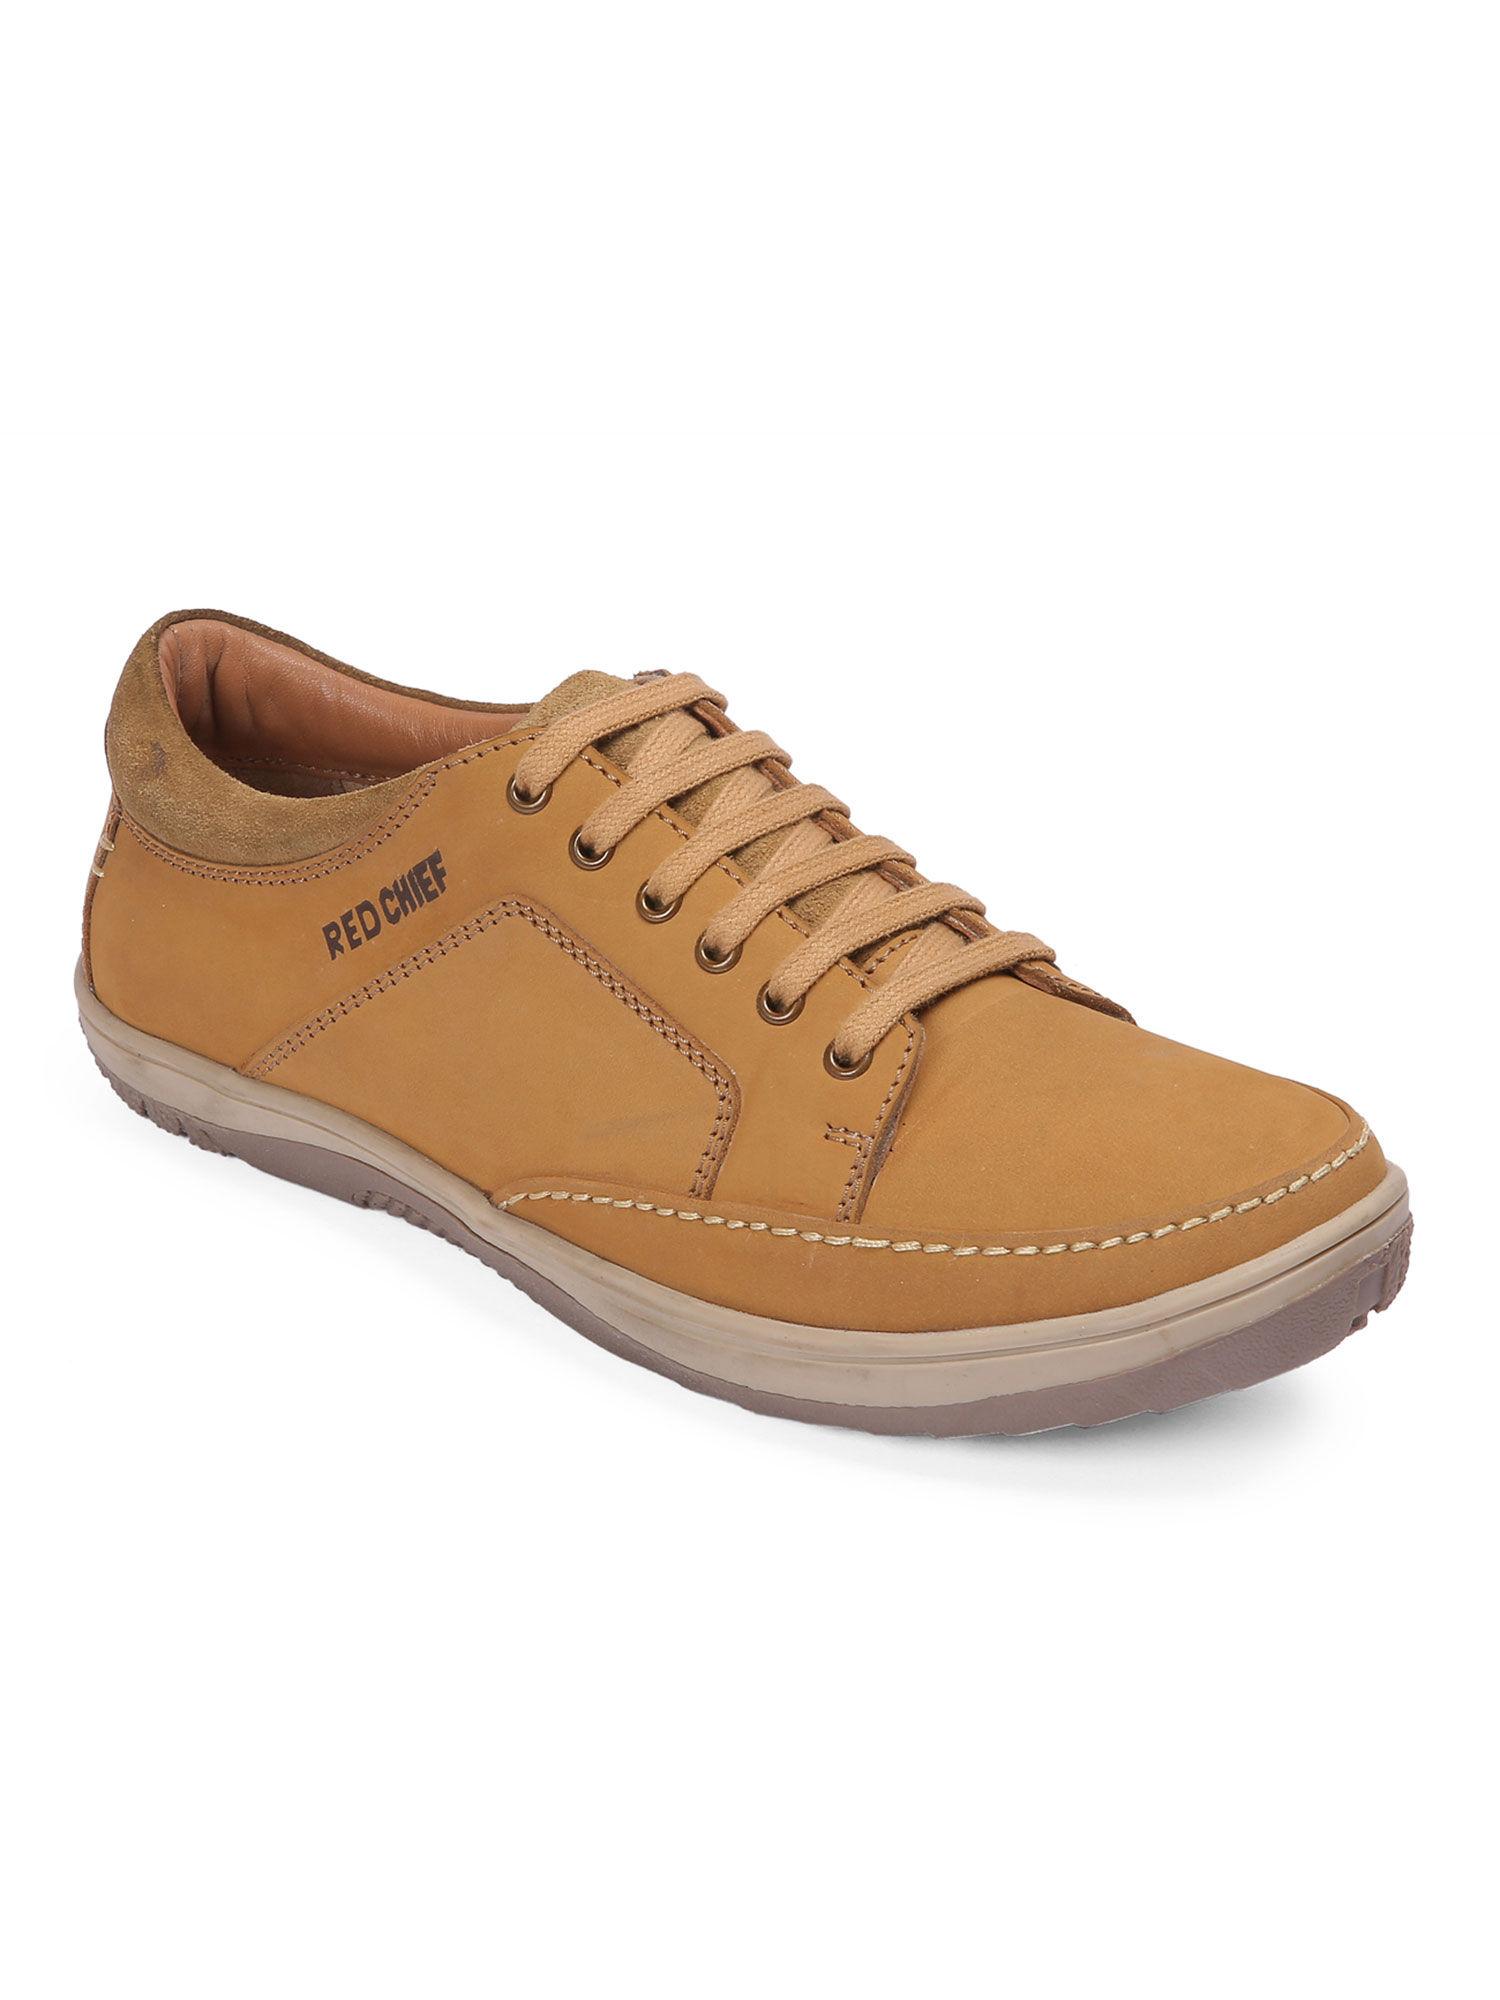 brown sneakers leather casual shoes